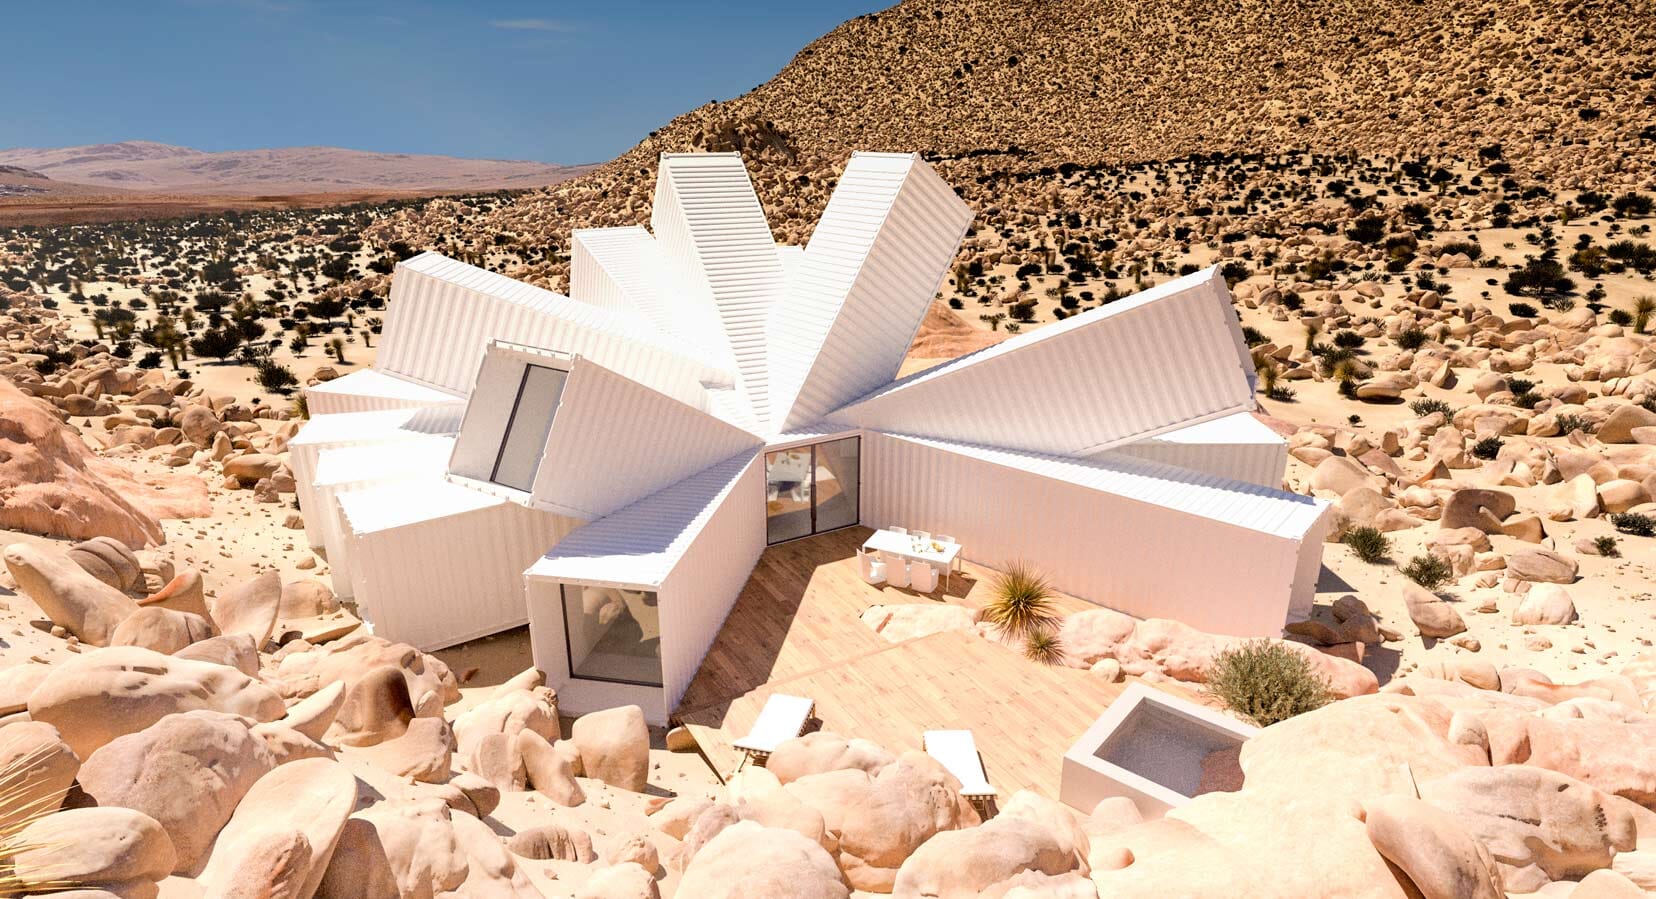 Joshua Tree Residence: Shipping container architecture at its best